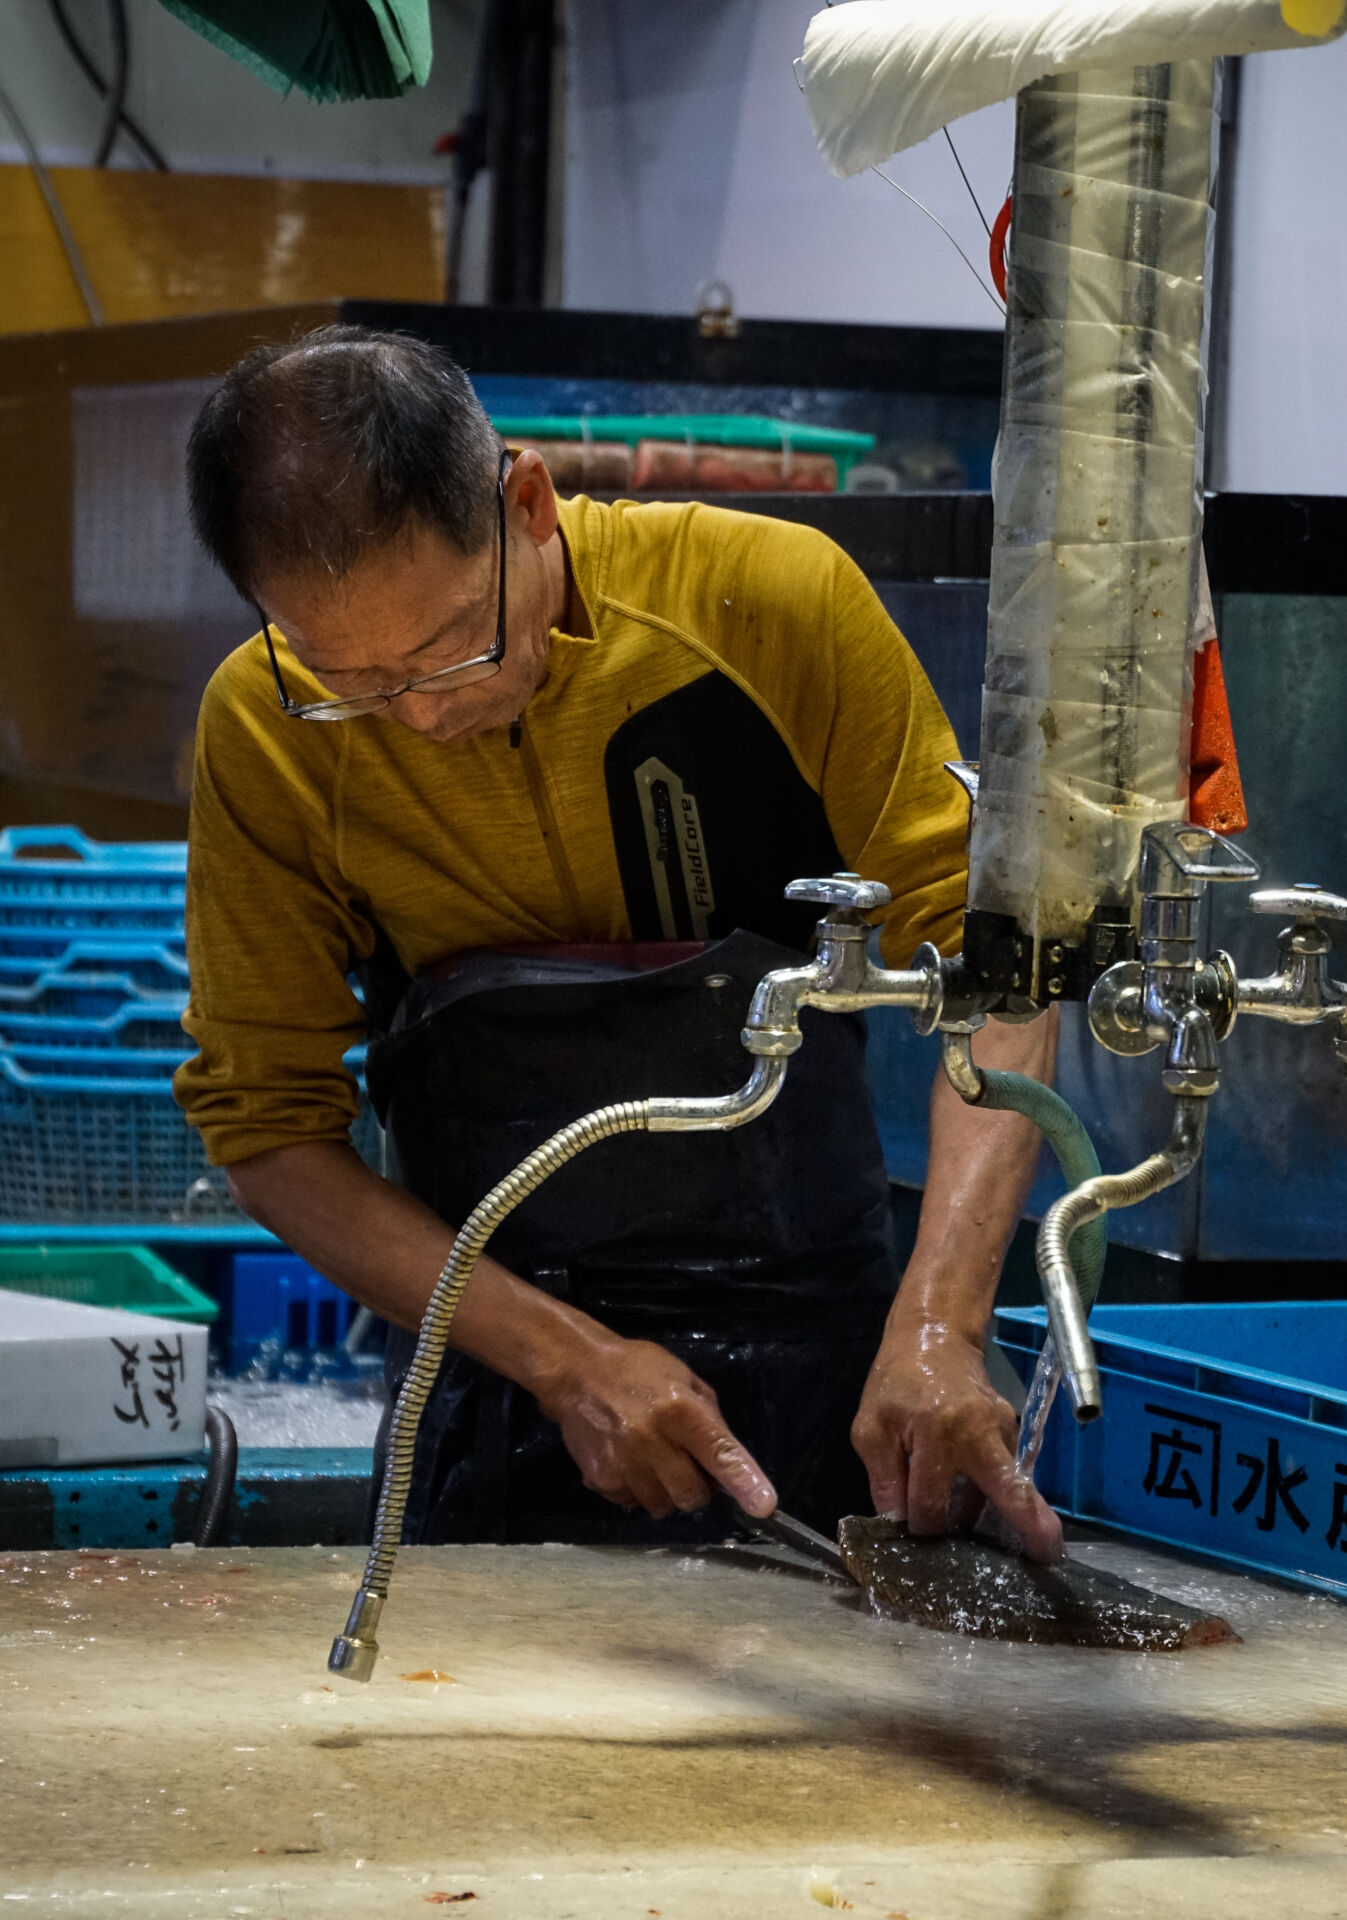 A fishmonger expertly cleans a fish